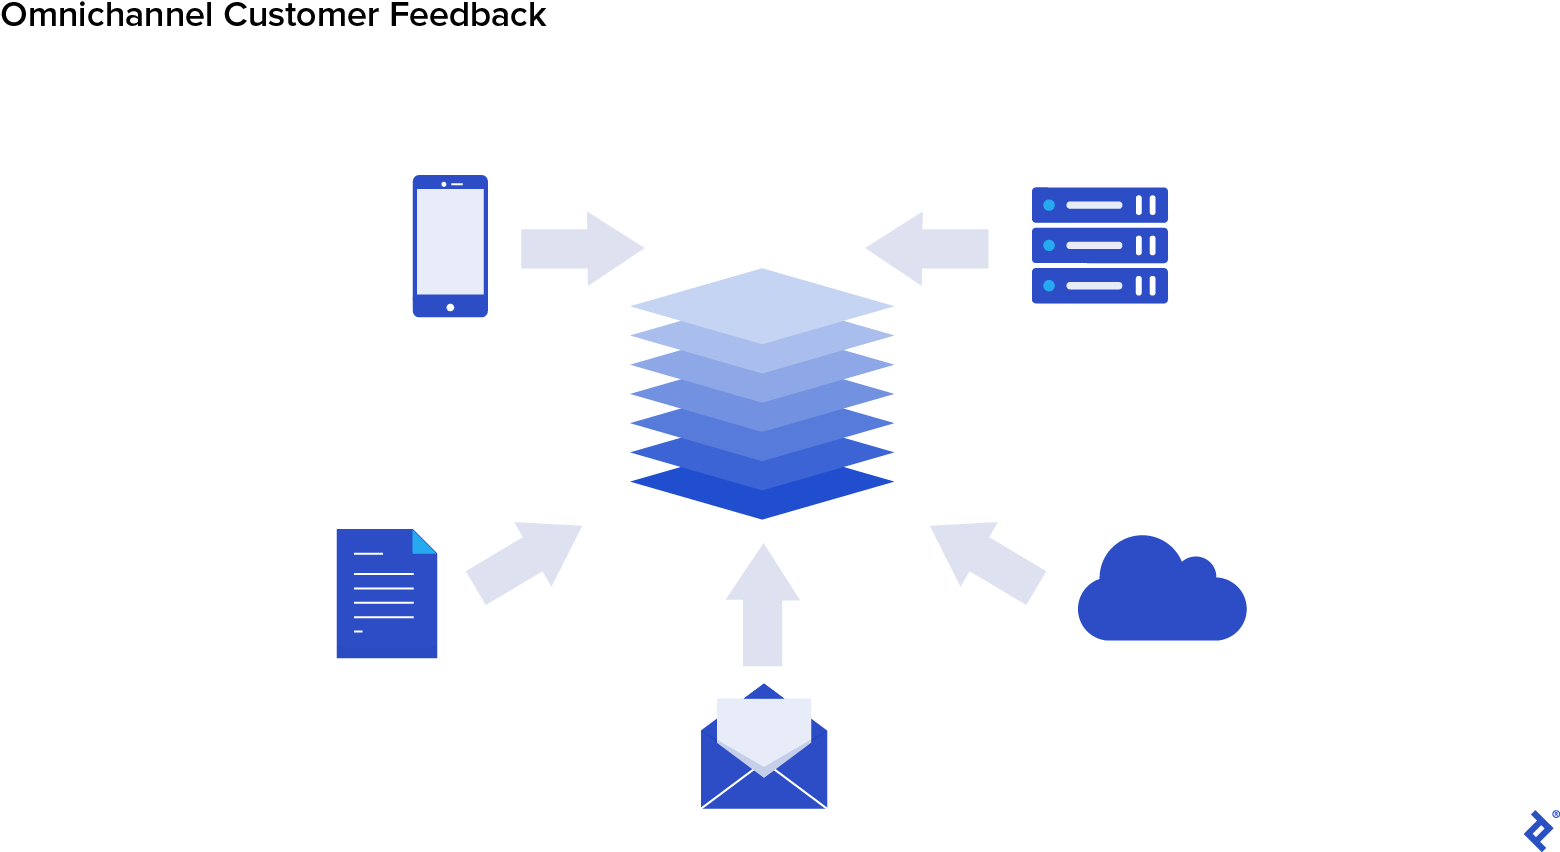 Voice of the customer feedback comes from various channels: text messages, phone calls, email chains, and customer resource management databases.